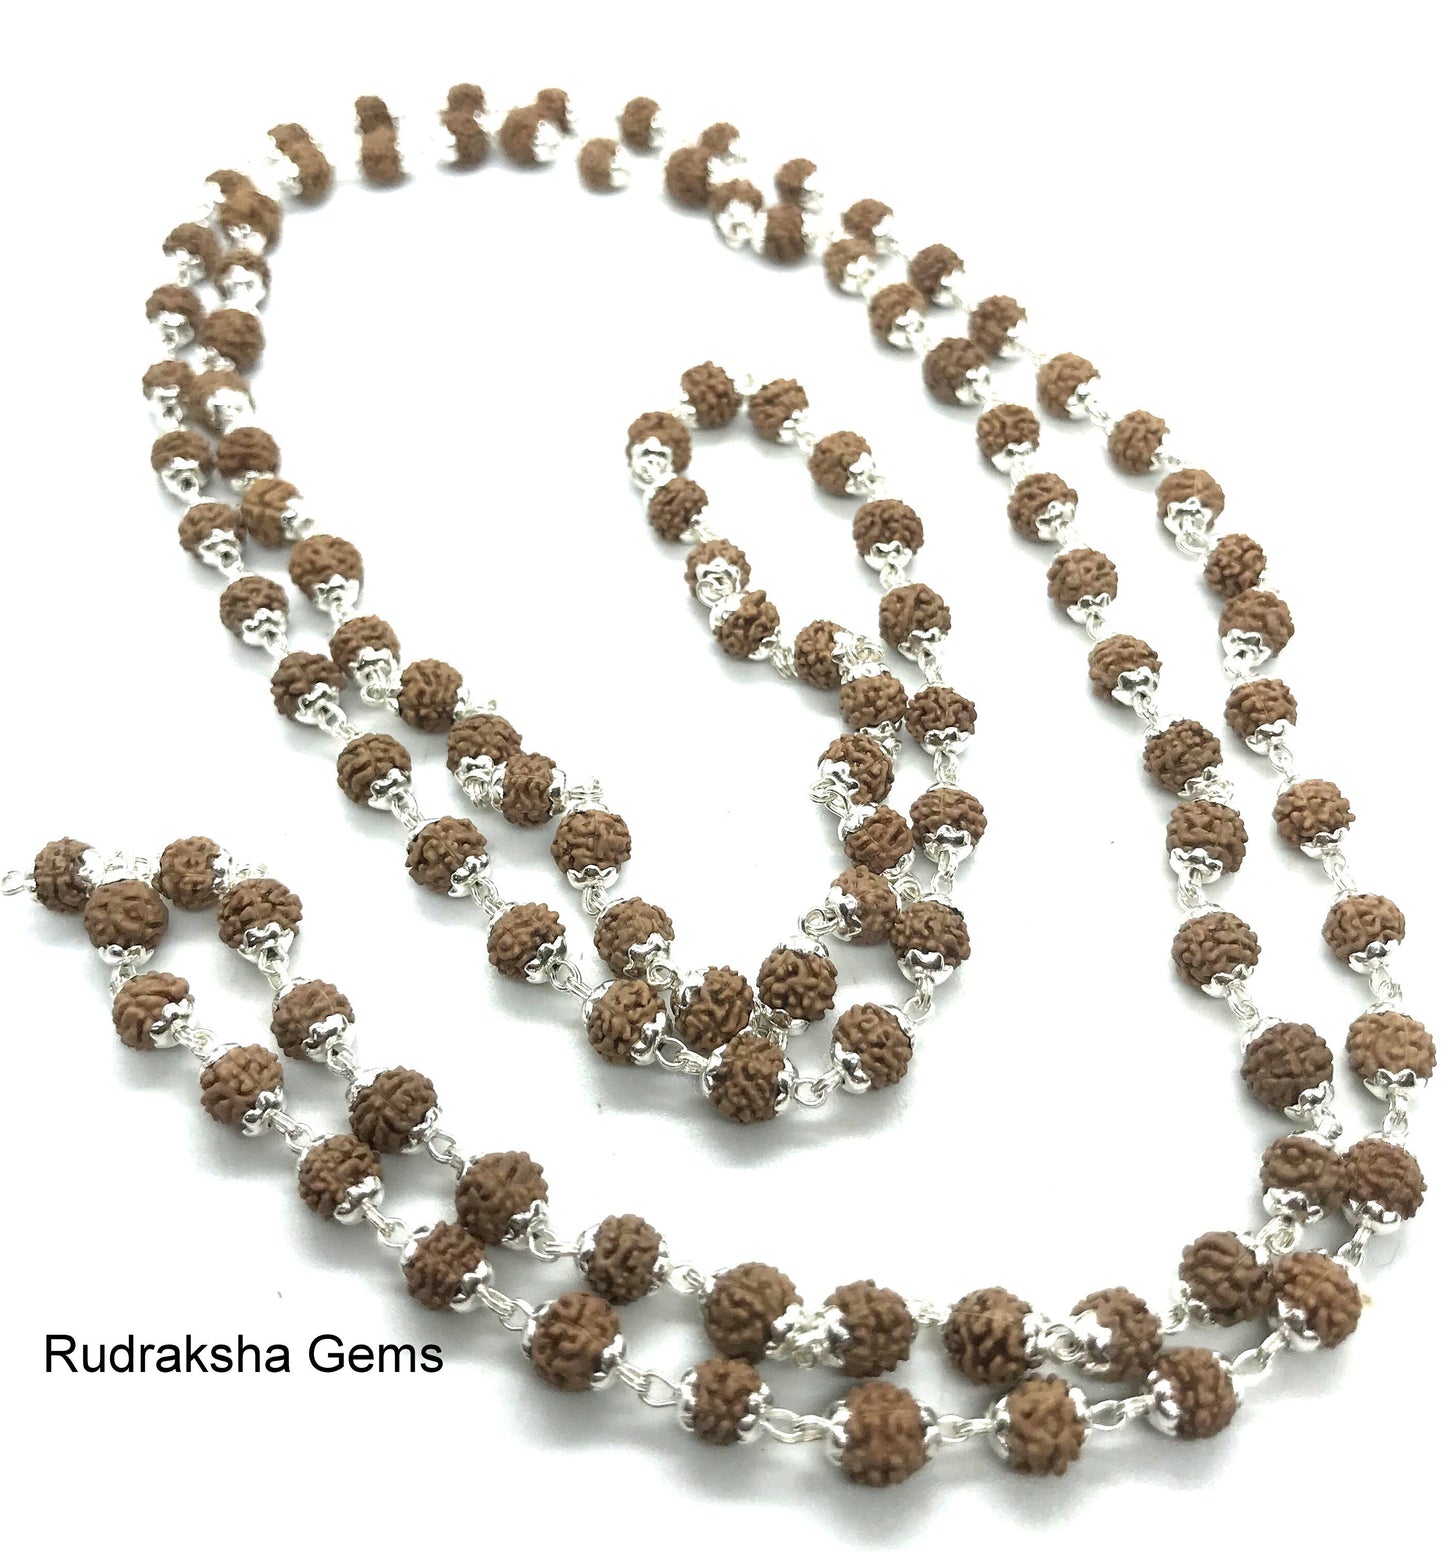 5 Mukhi Rudraksha, Indonesian Beads 925 silver cap Mala, 108 beads Rudraksh Mala Necklace, 4mm tiny rudraksha Genuine Beads wire wrapped